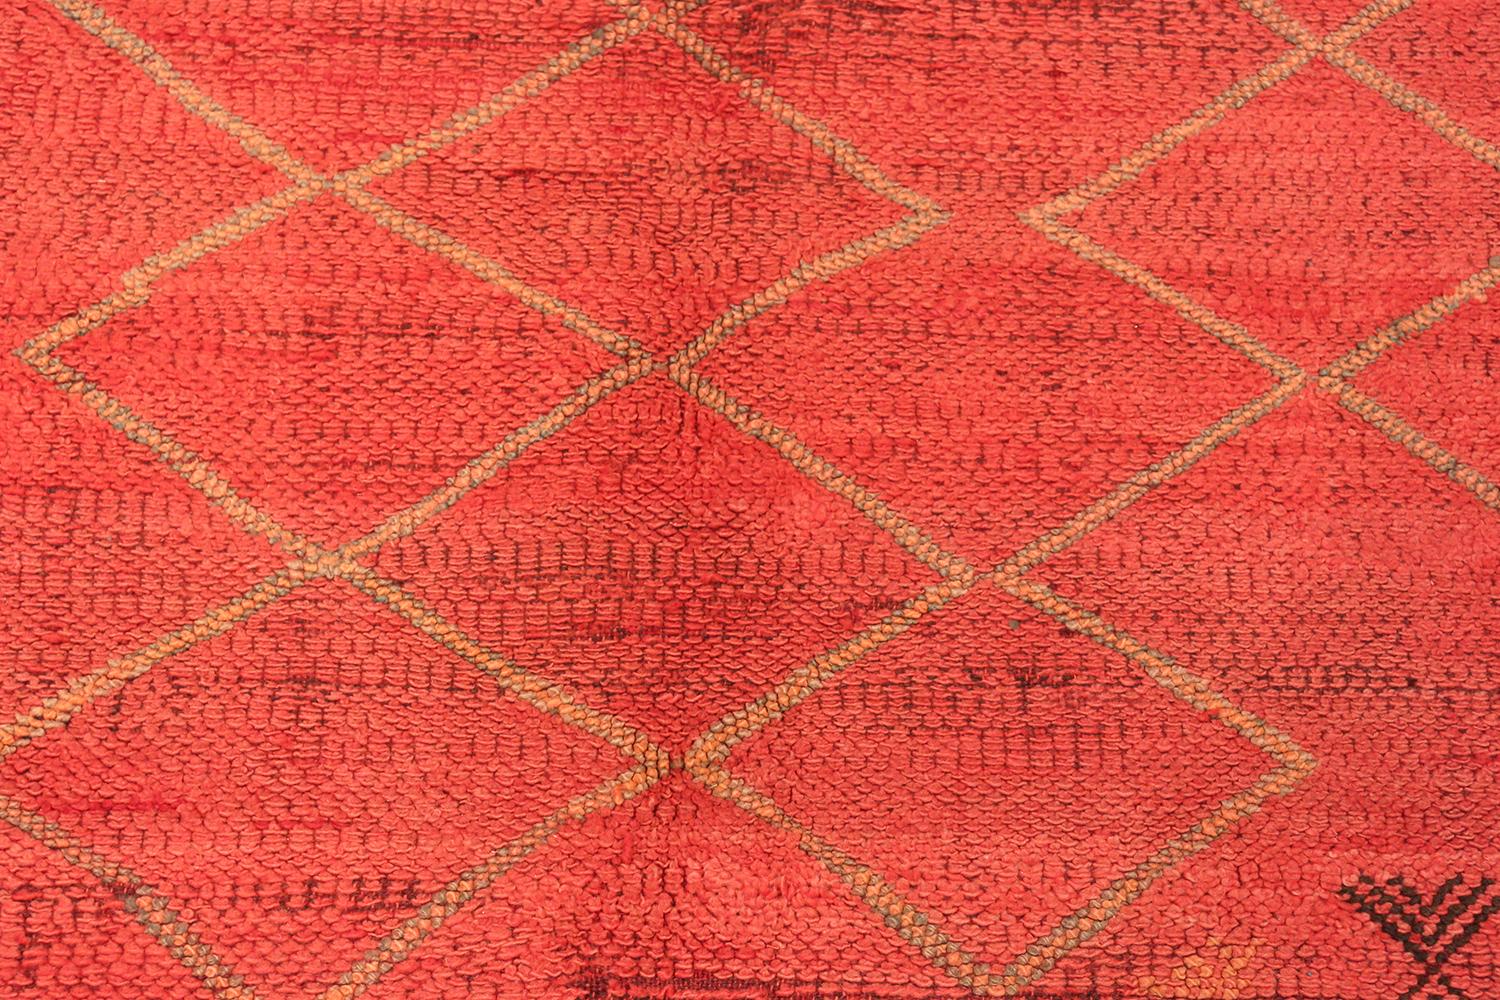 Tribal Vintage Moroccan Red Rug. Size: 5 ft. 6 in x 11 ft. 8 in